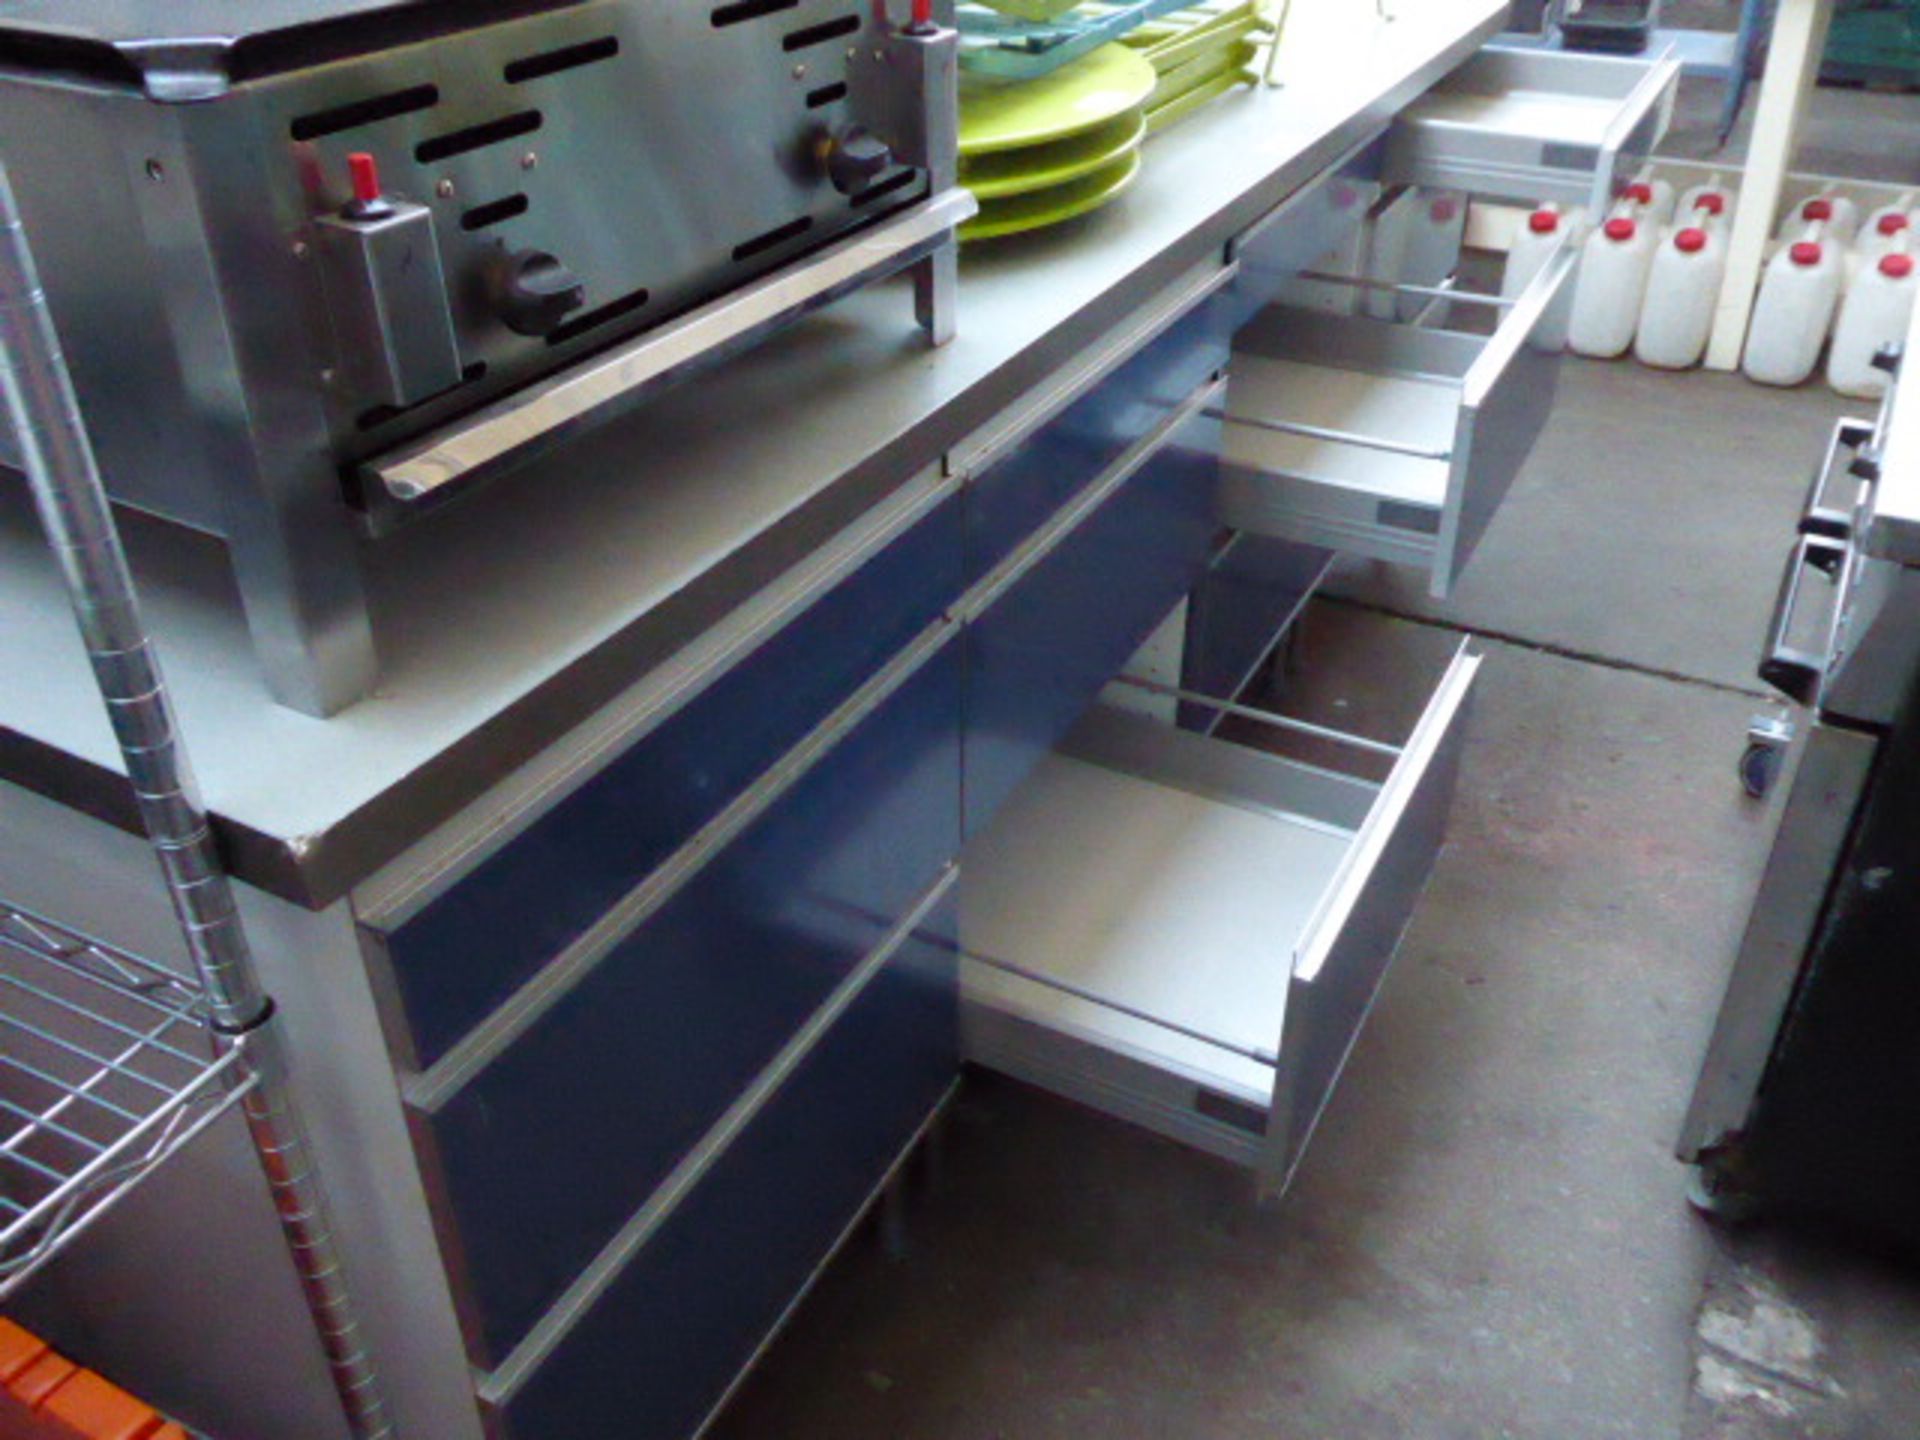 245cm by 120cm kitchen island in modular form, four sections under and grey work surface - Image 2 of 3